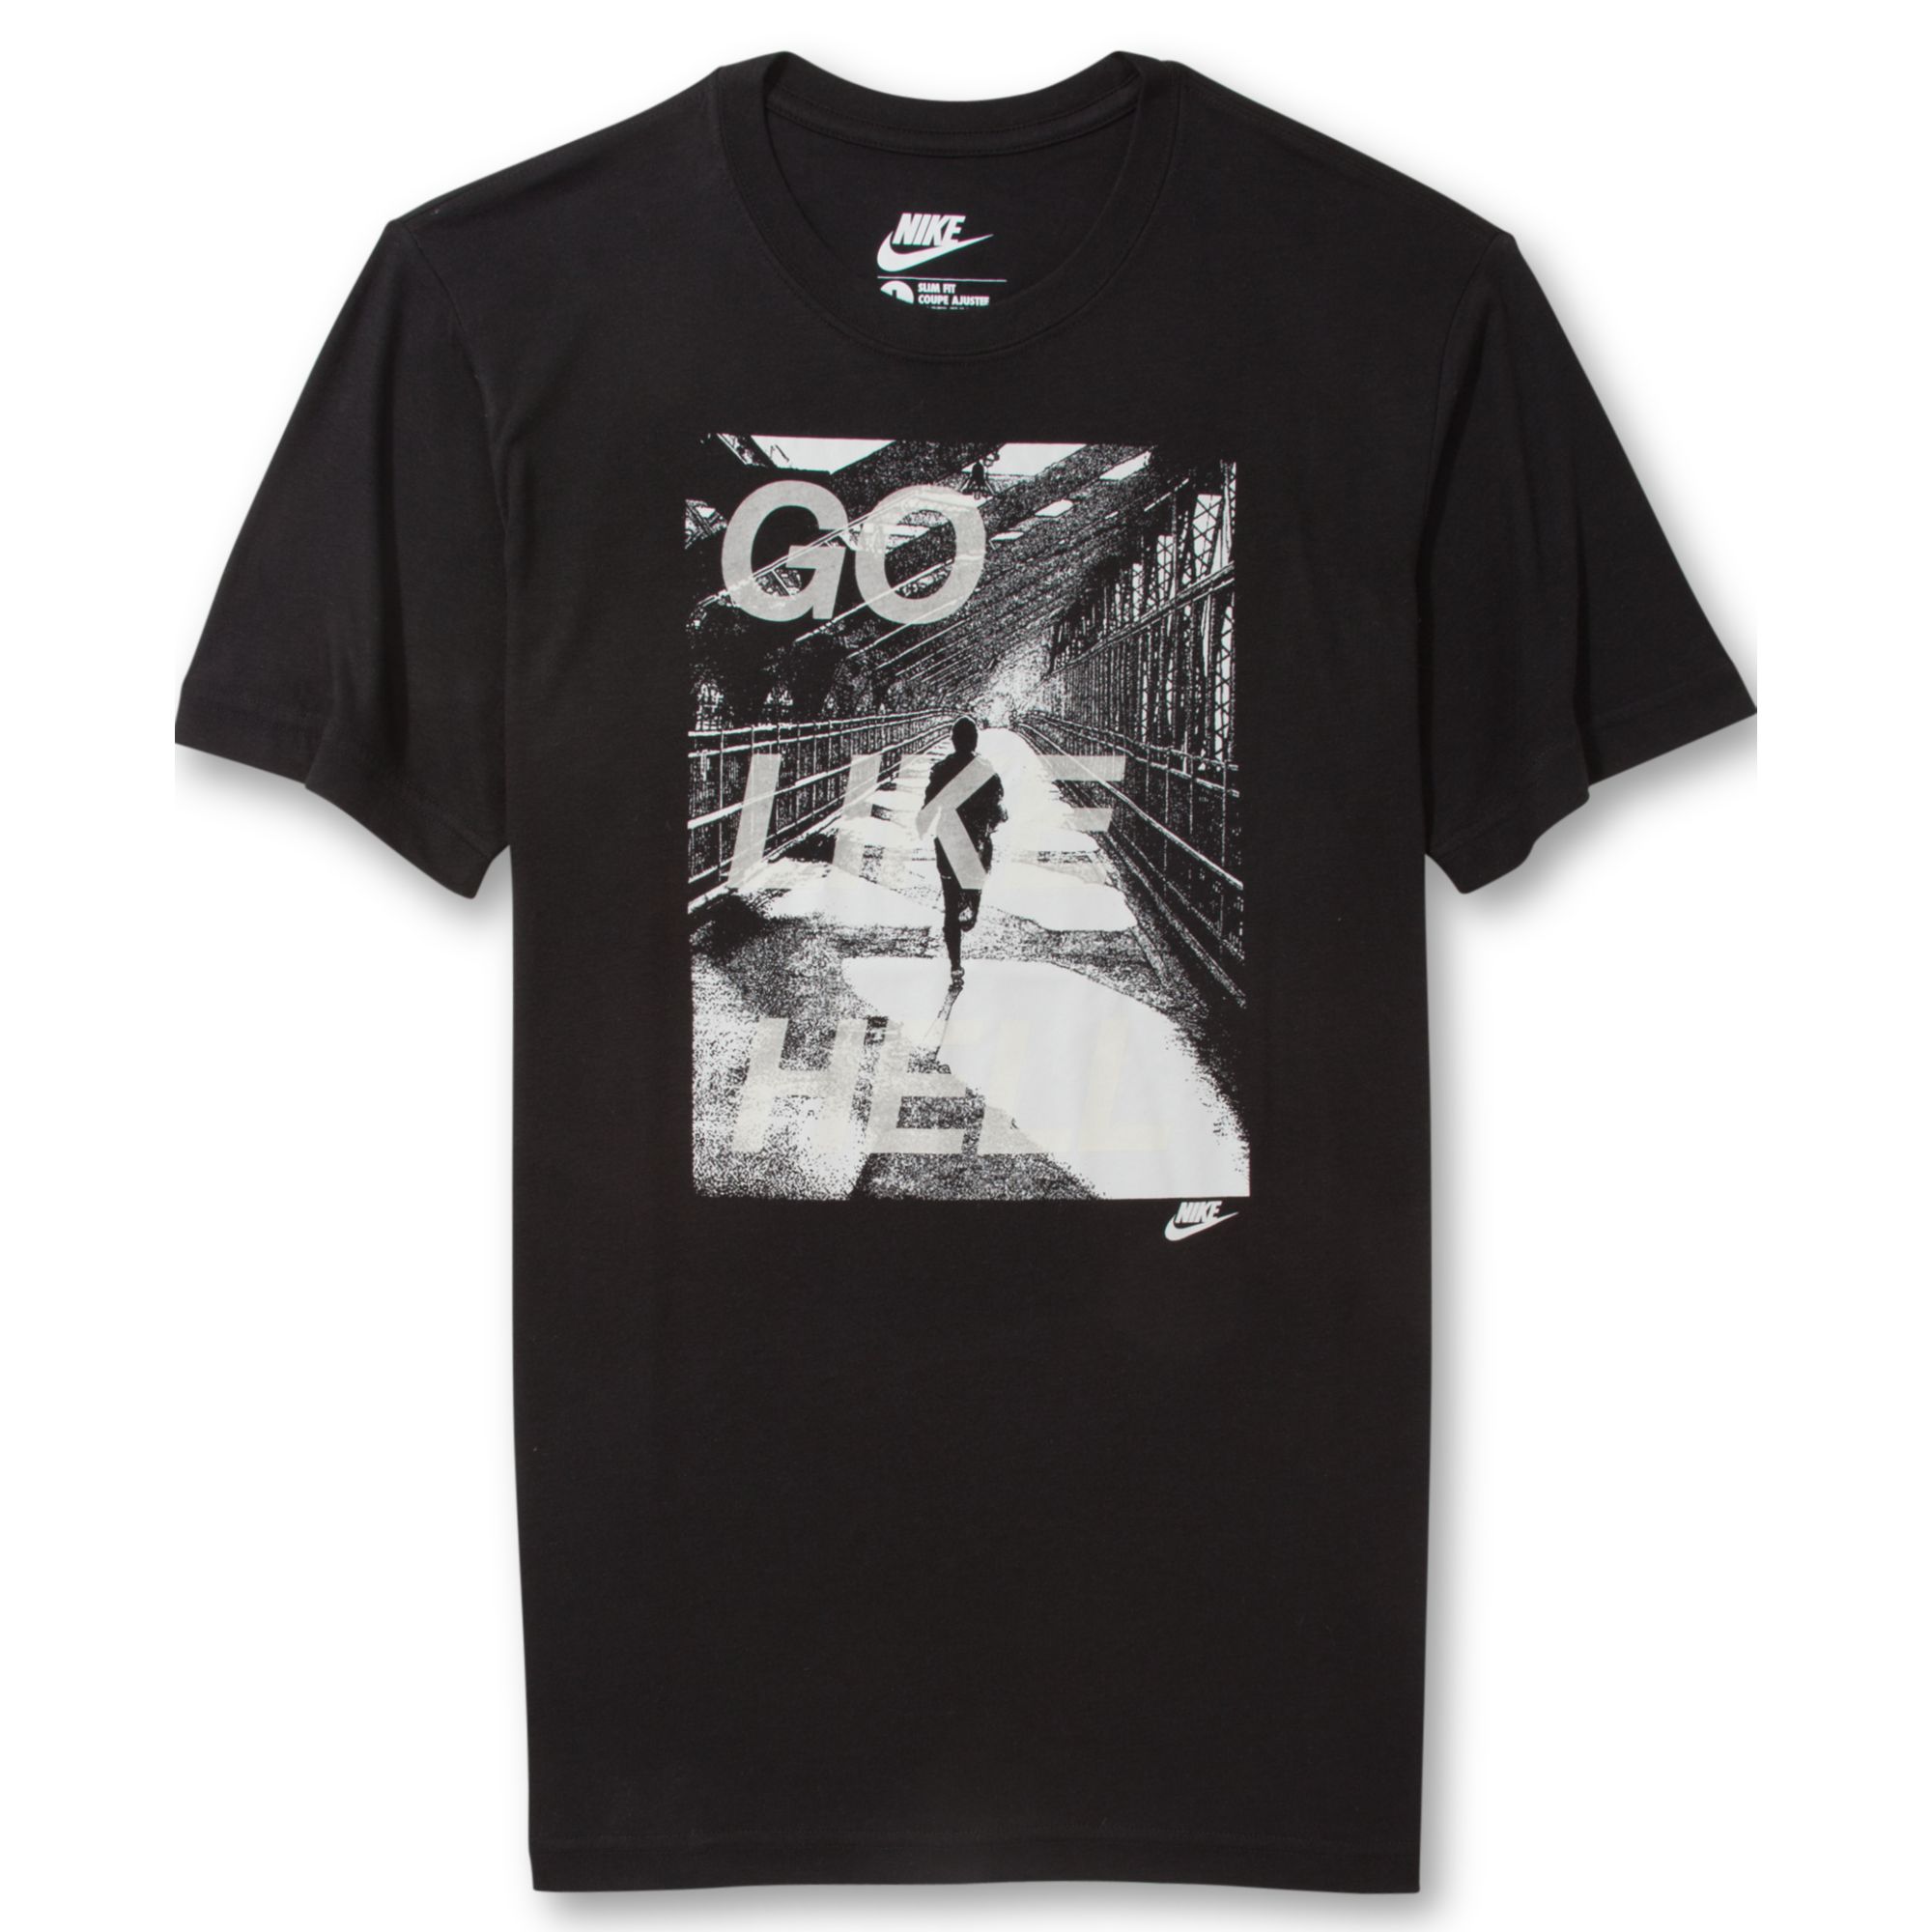 Nike Go Like Hell Graphic Tshirt in Black for Men - Lyst